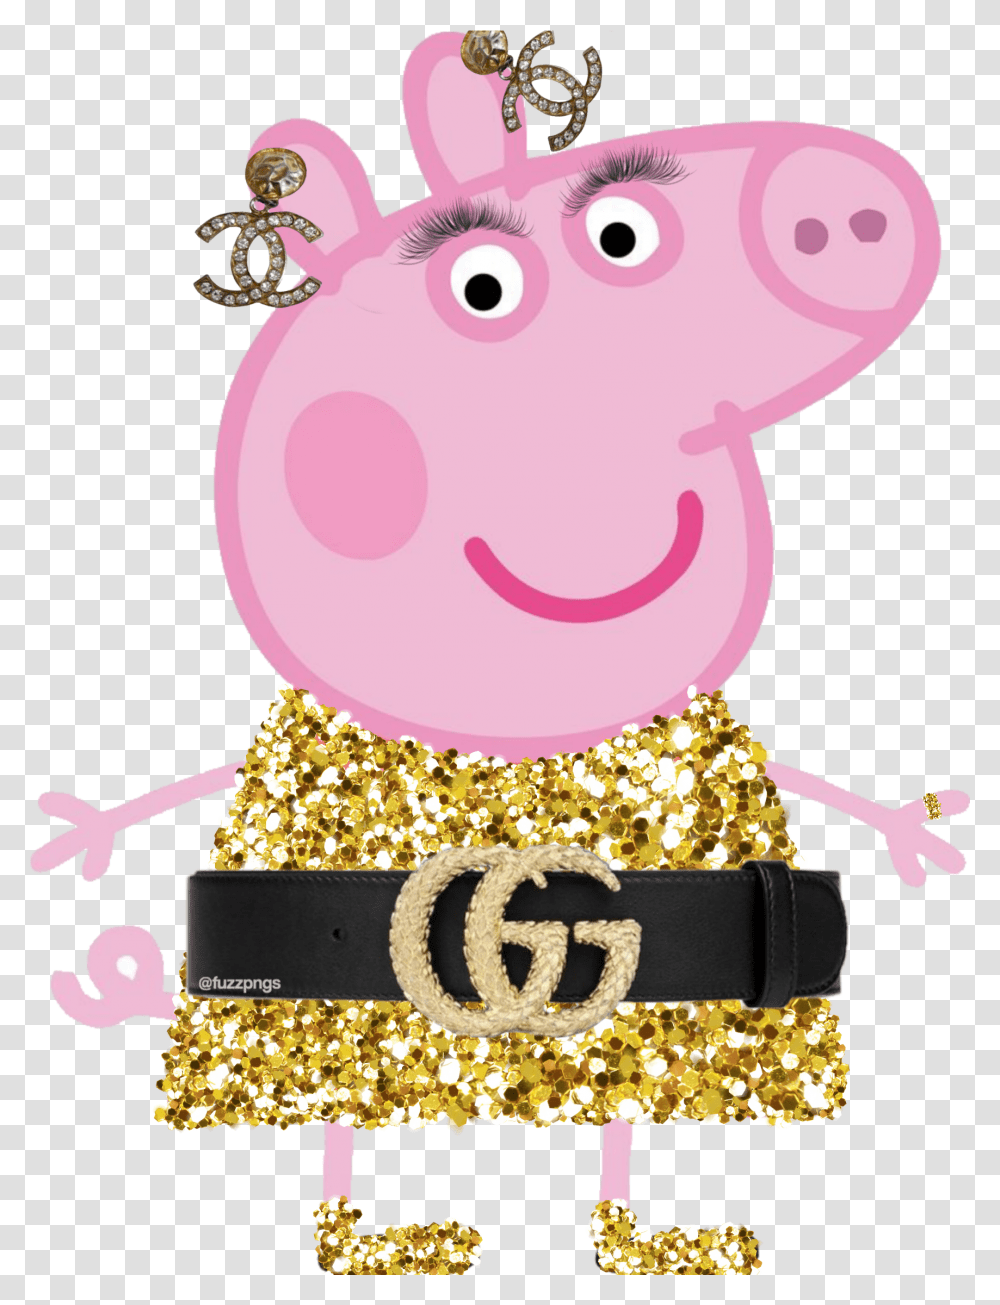 Peppapig Luxury Gucci Peppapiggucci Chanel Pig Peppa Pig, Sweets, Food, Confectionery, Birthday Cake Transparent Png